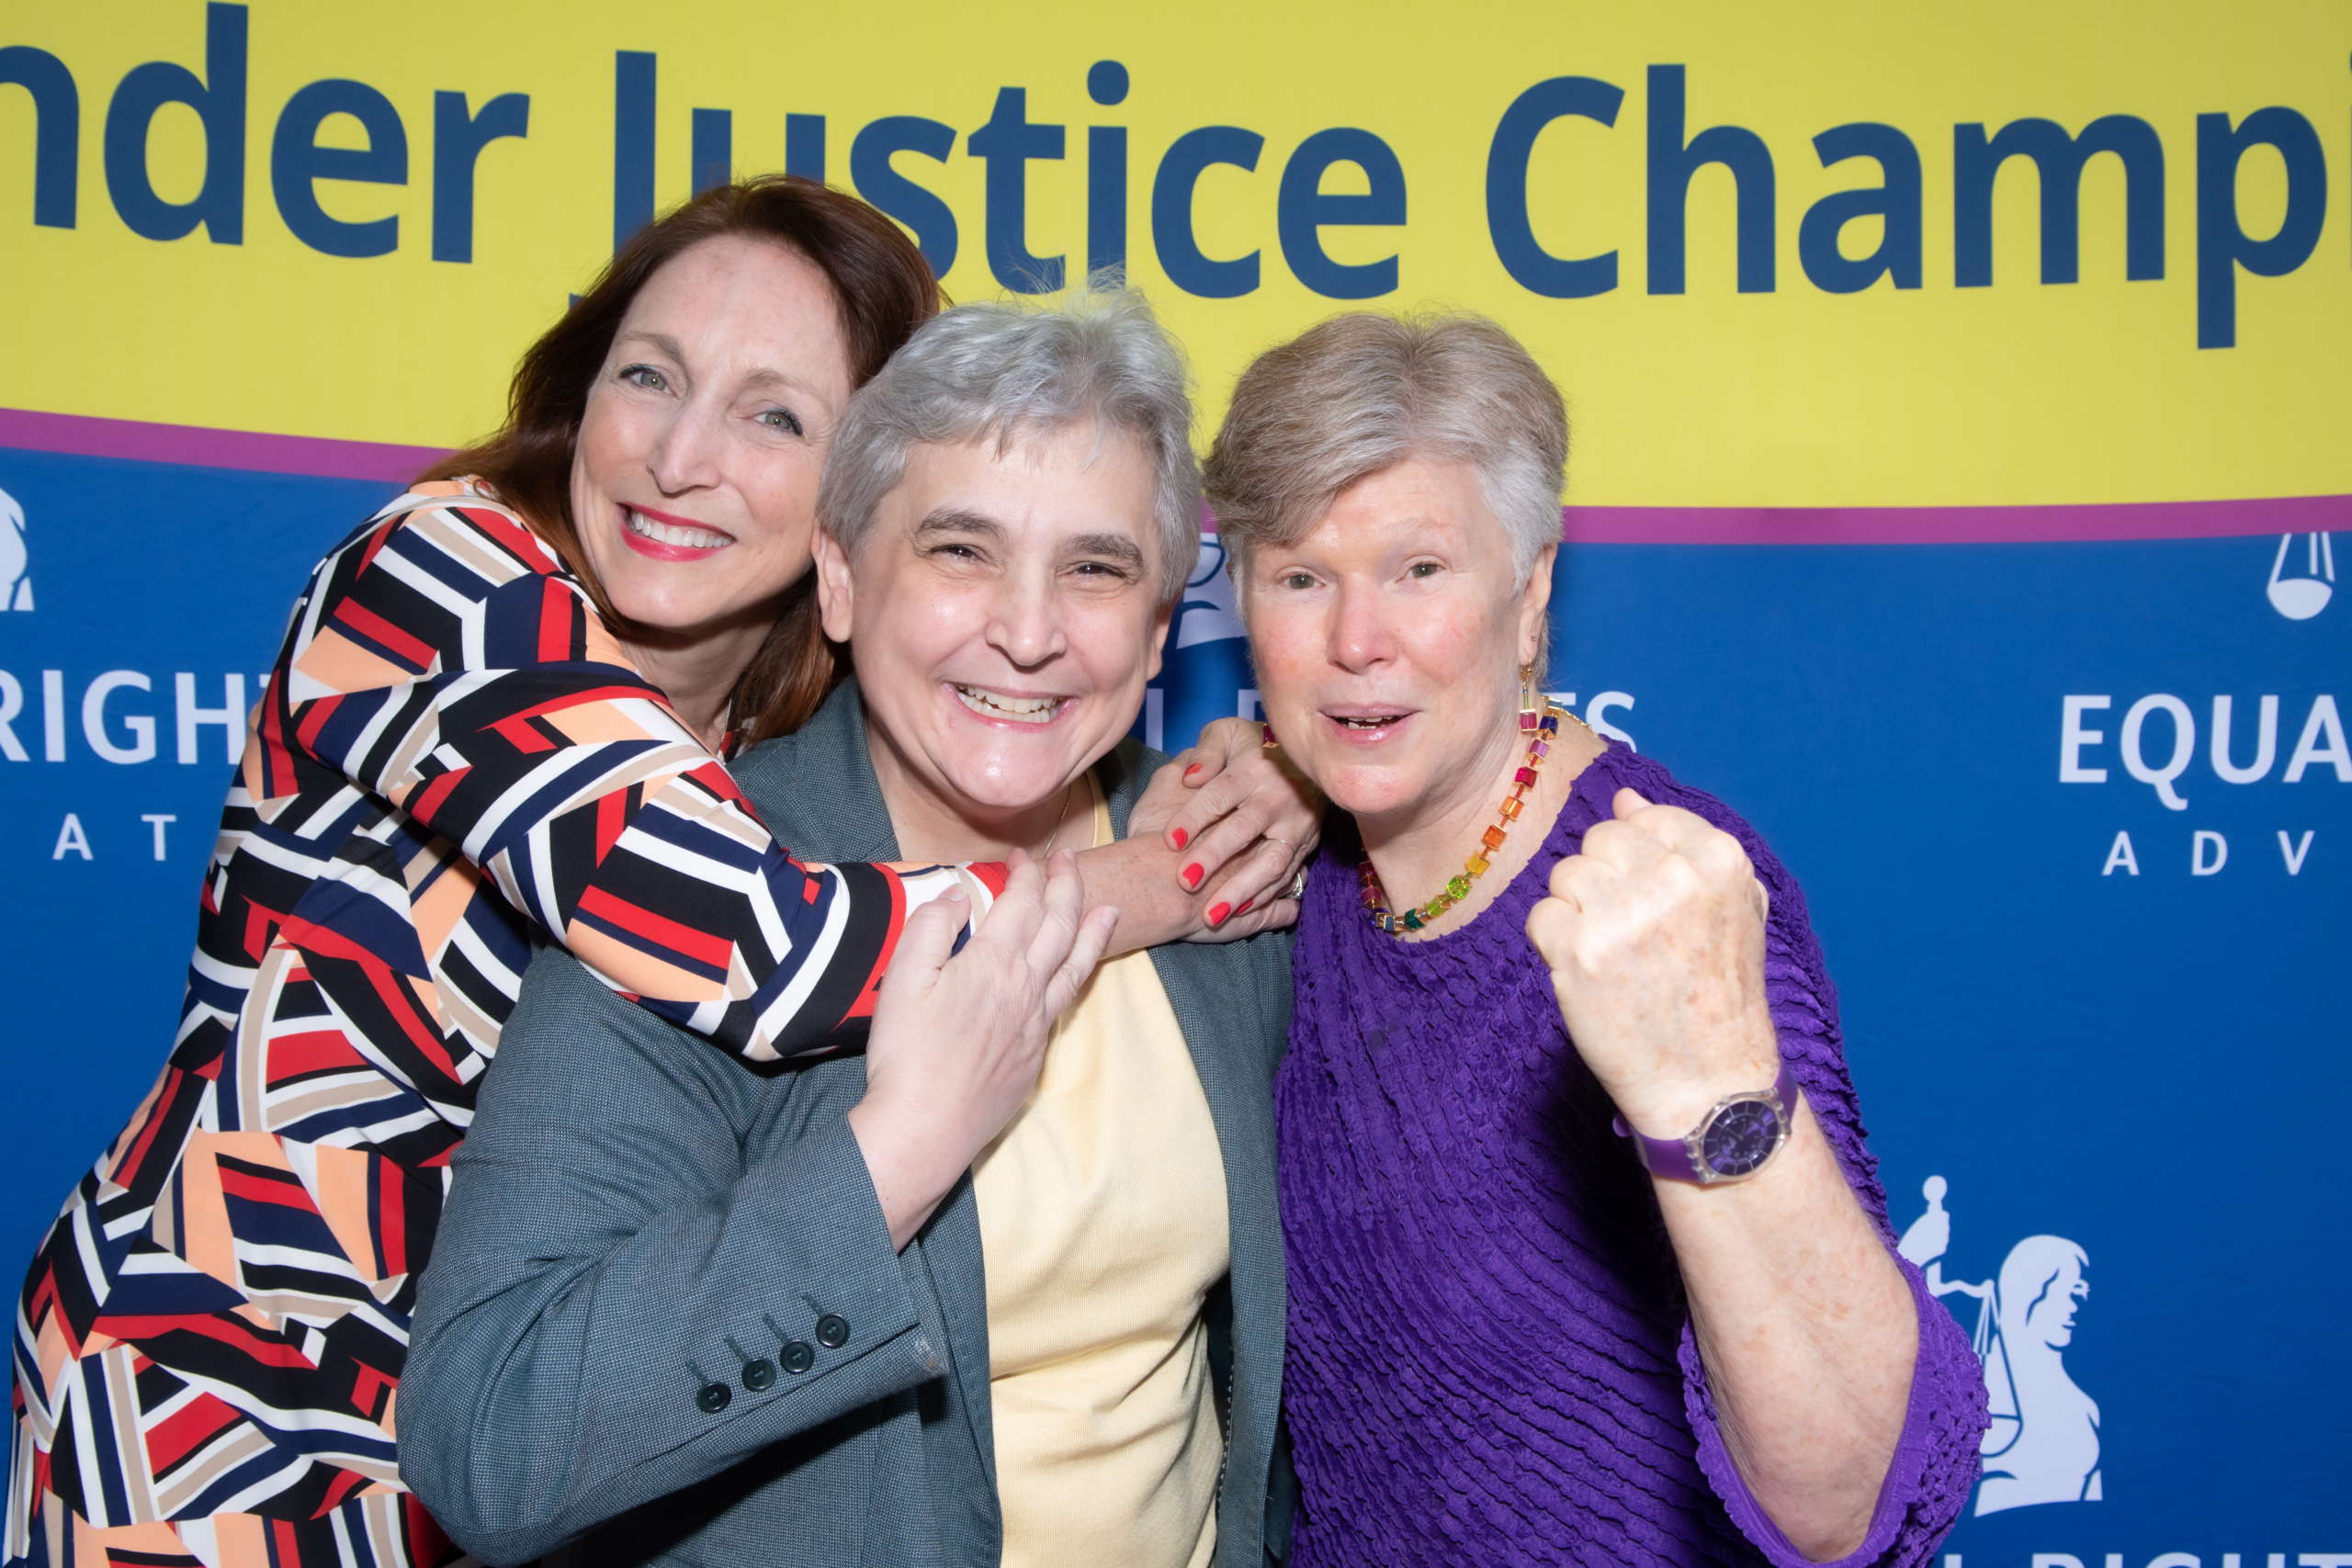 Equal Rights Advocates honors Kristen Galles with 2022 Ramey Gender Justice Award pic